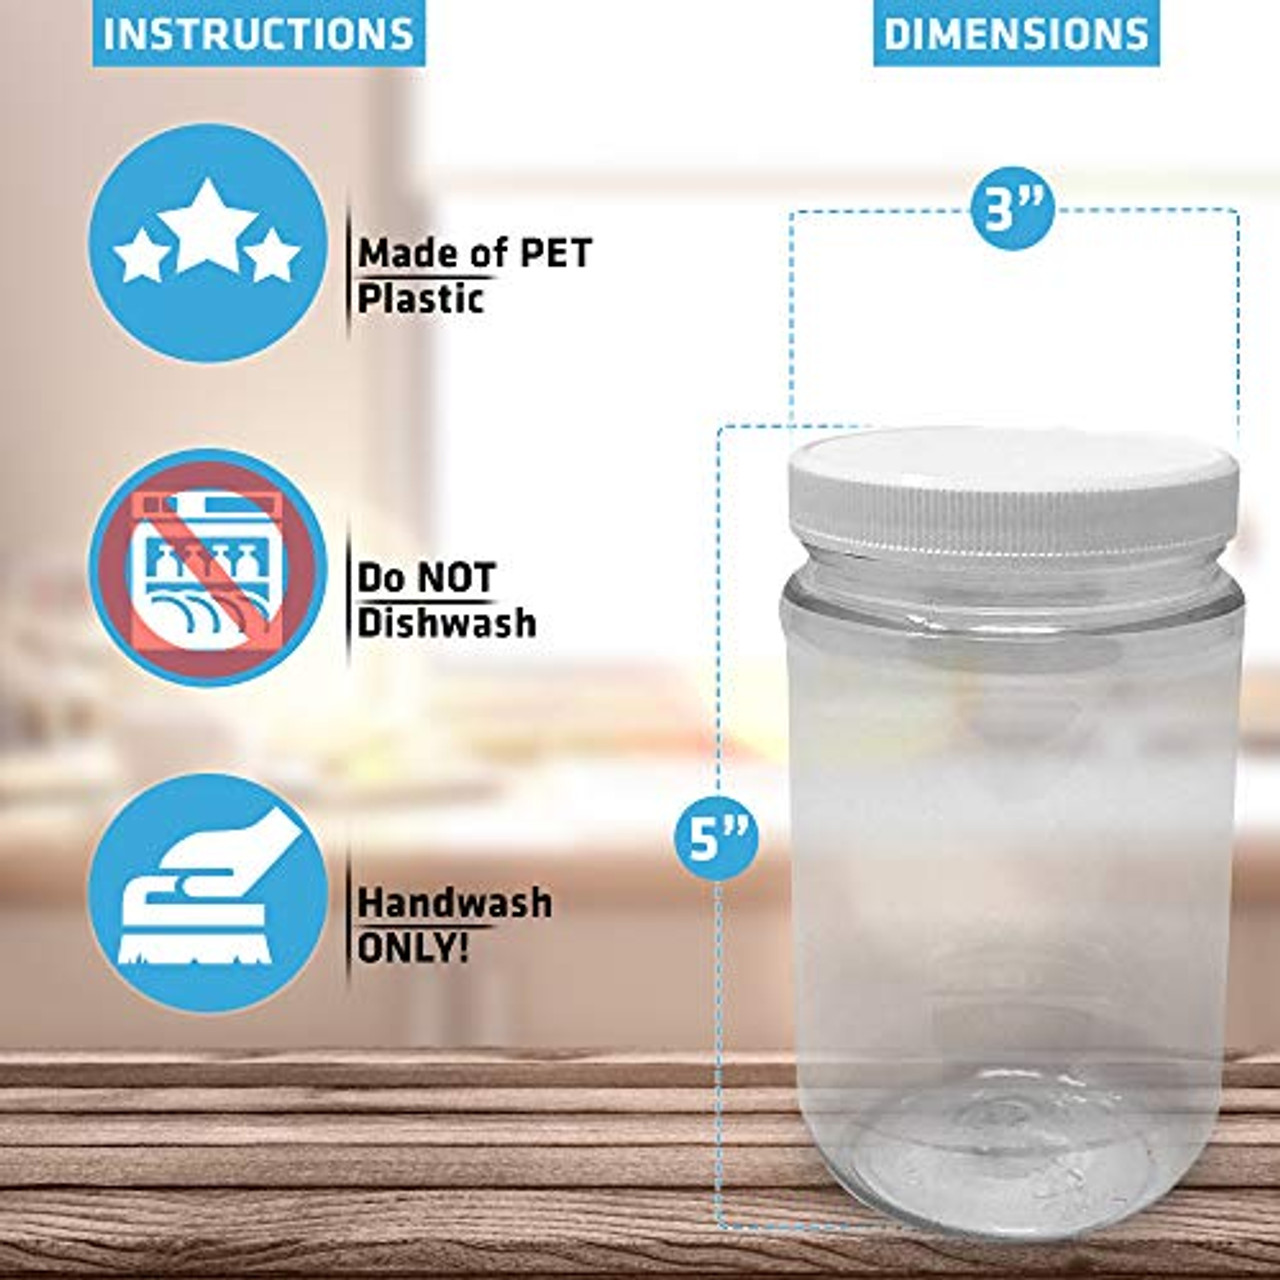 Clear Plastic Jars with Screw Lid